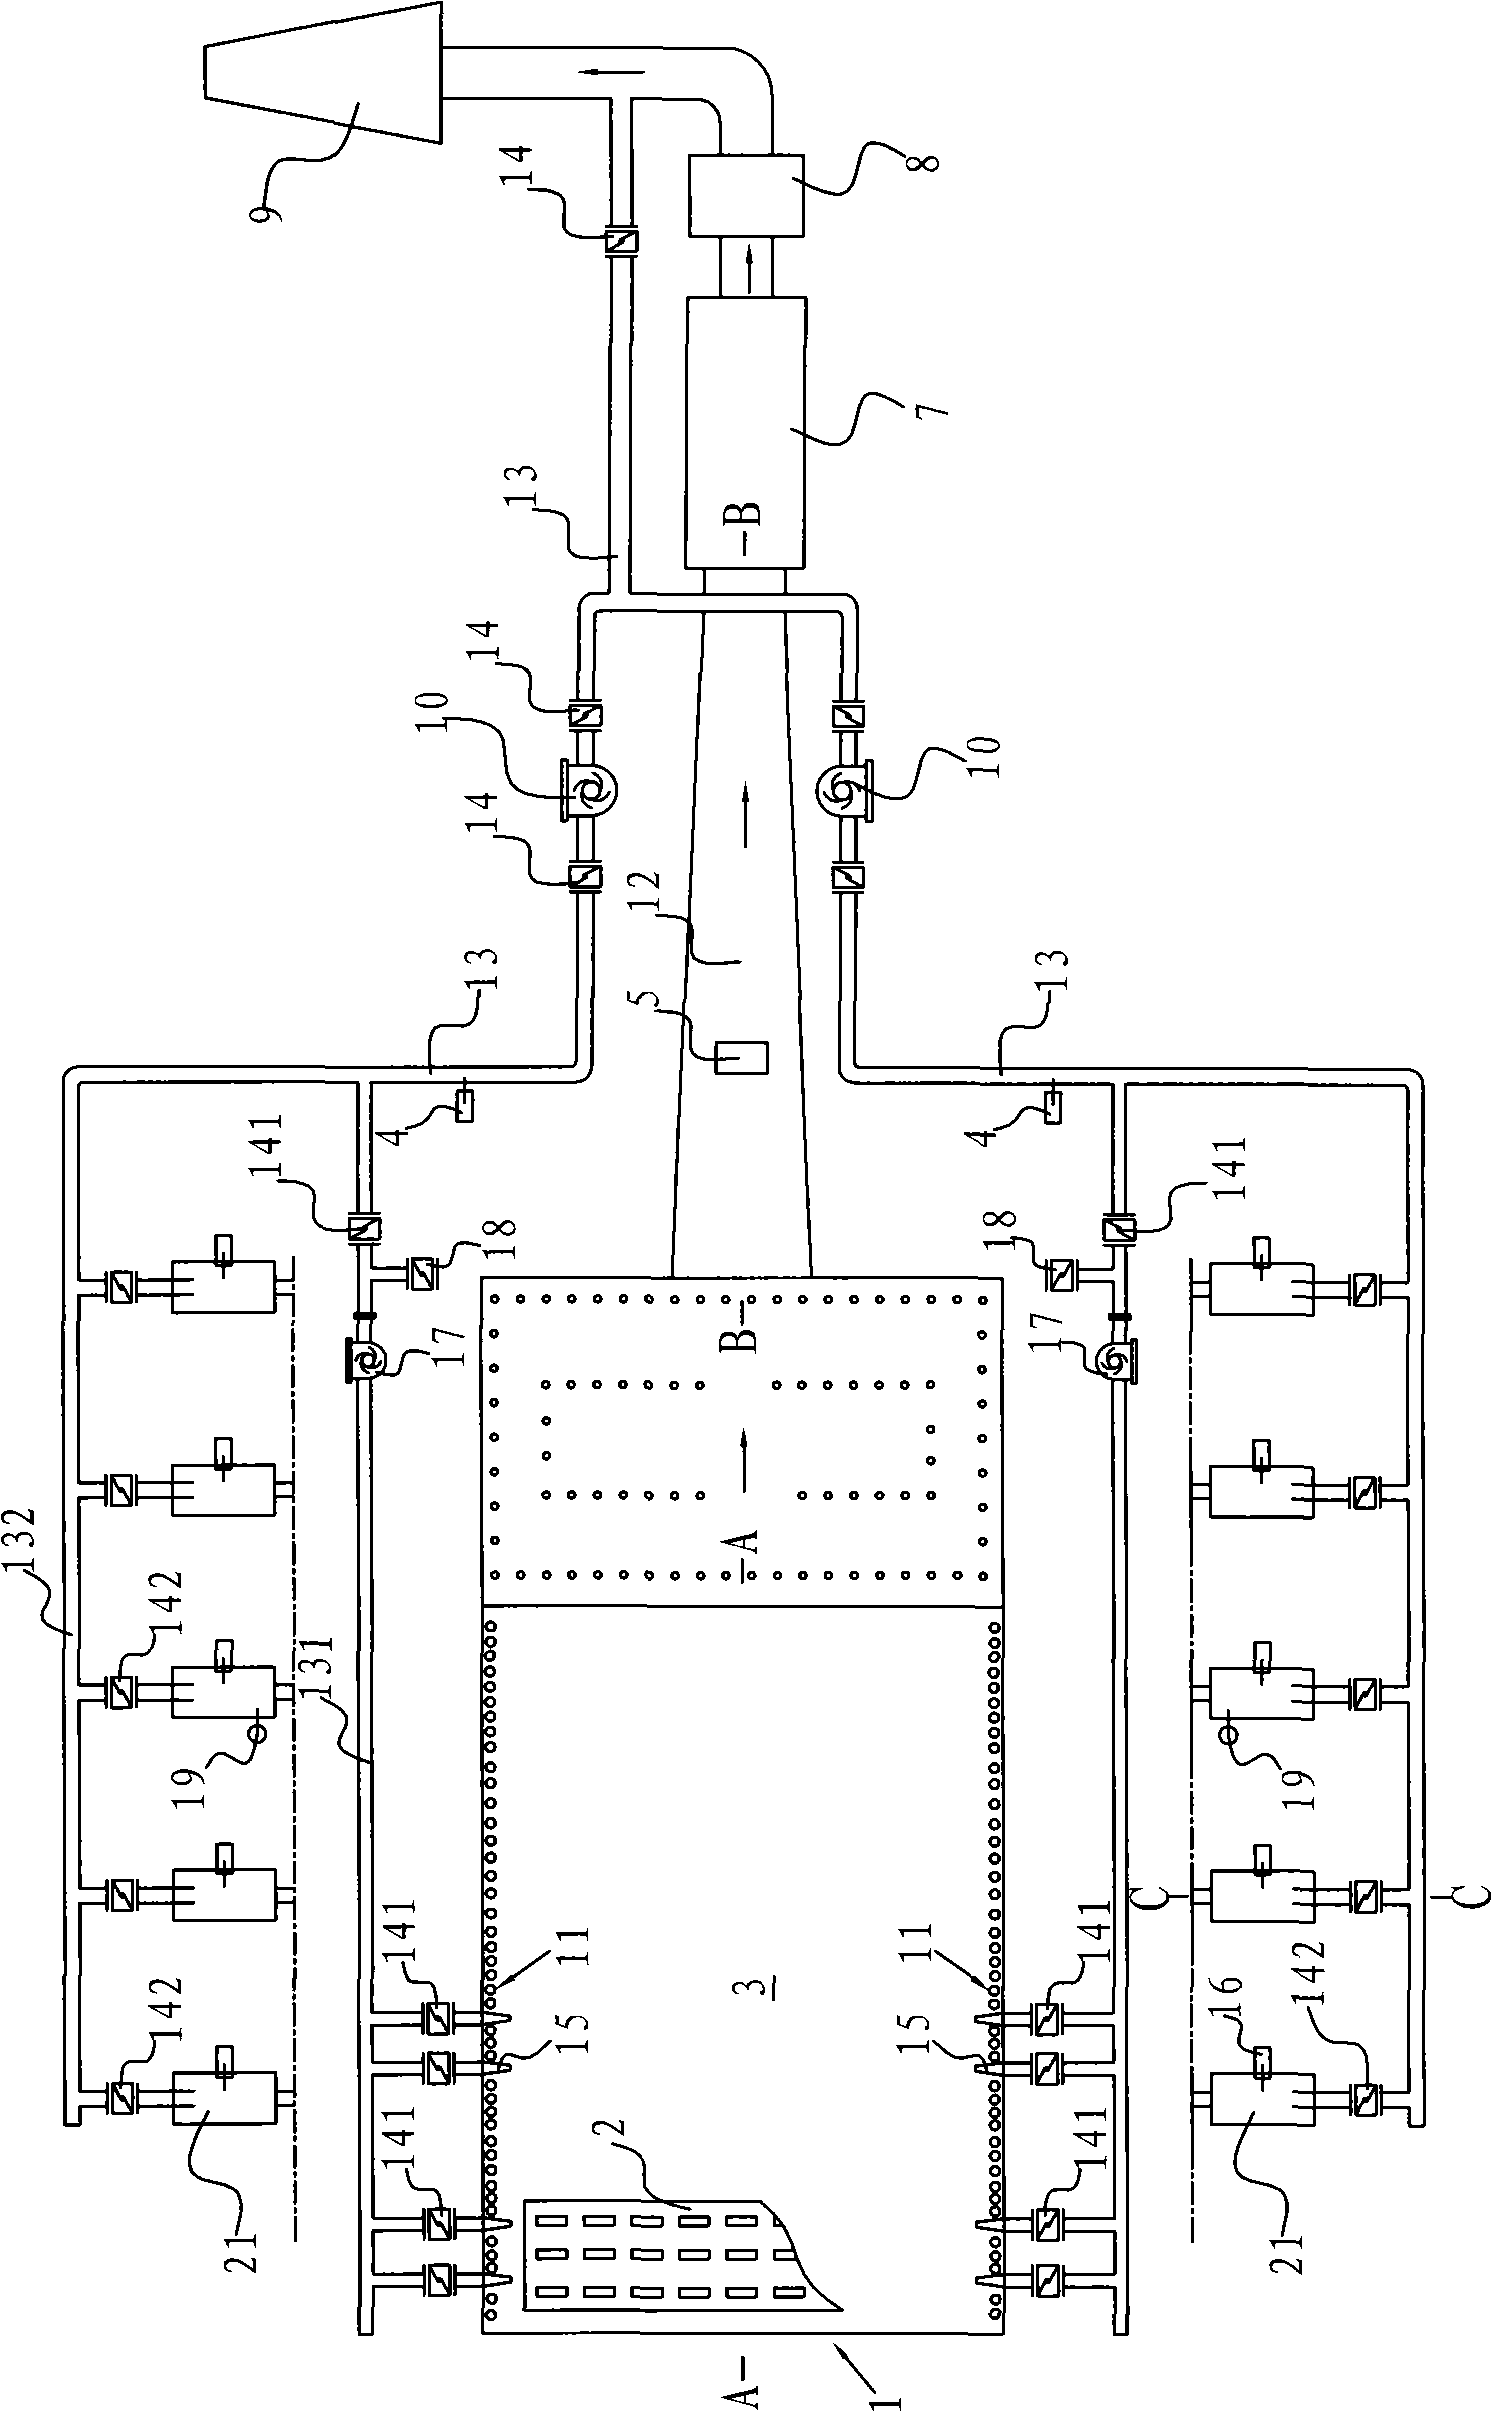 Coal fired boiler capable of controlling flue gas oxygen content